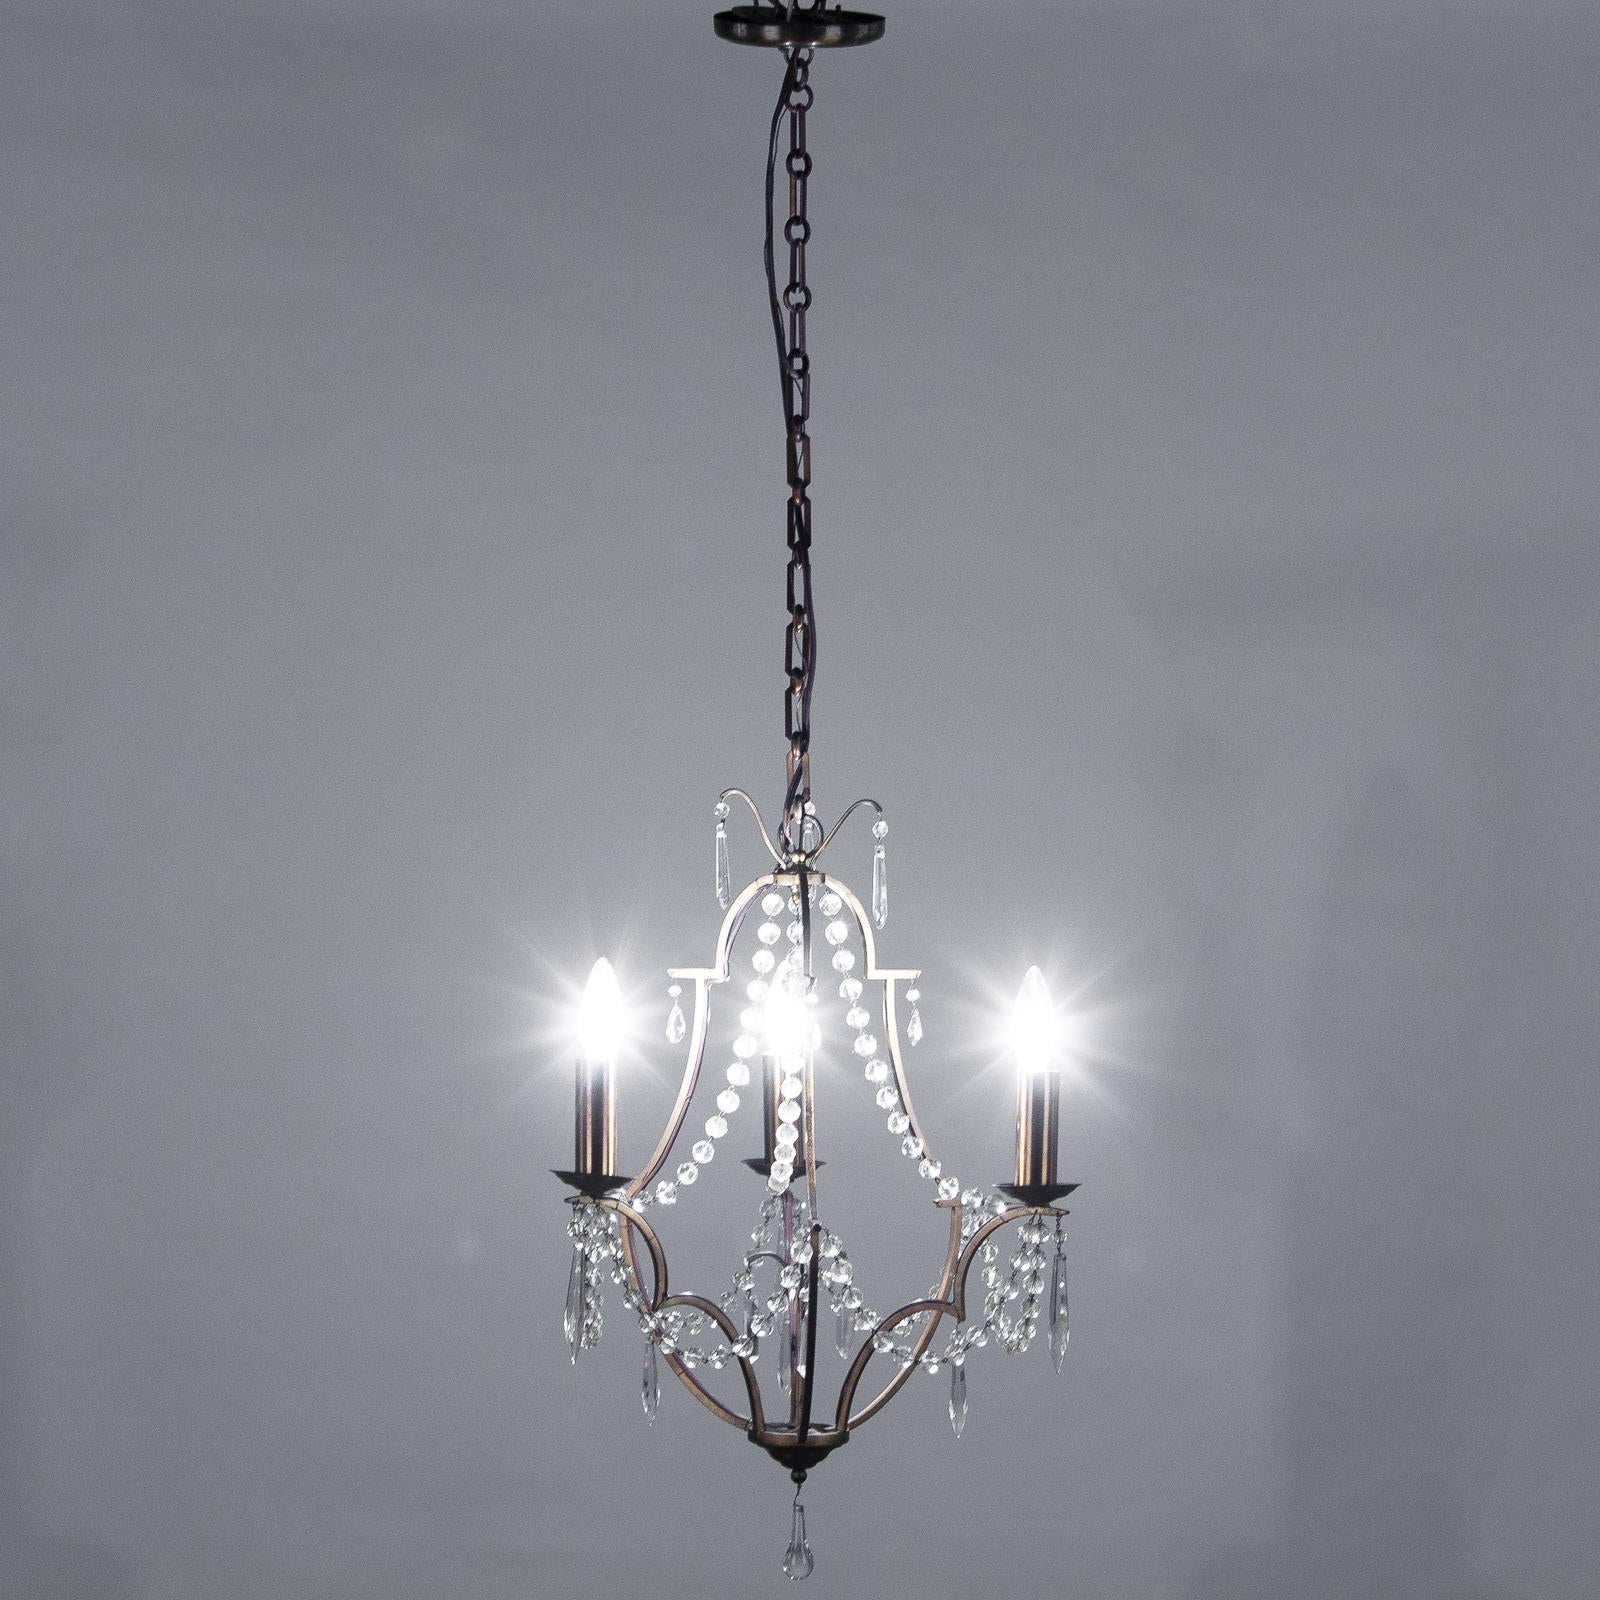 A late 1800's small 3-light Chandelier purchased in Lyon. The light fixture is made of gilded bronze with crystals.